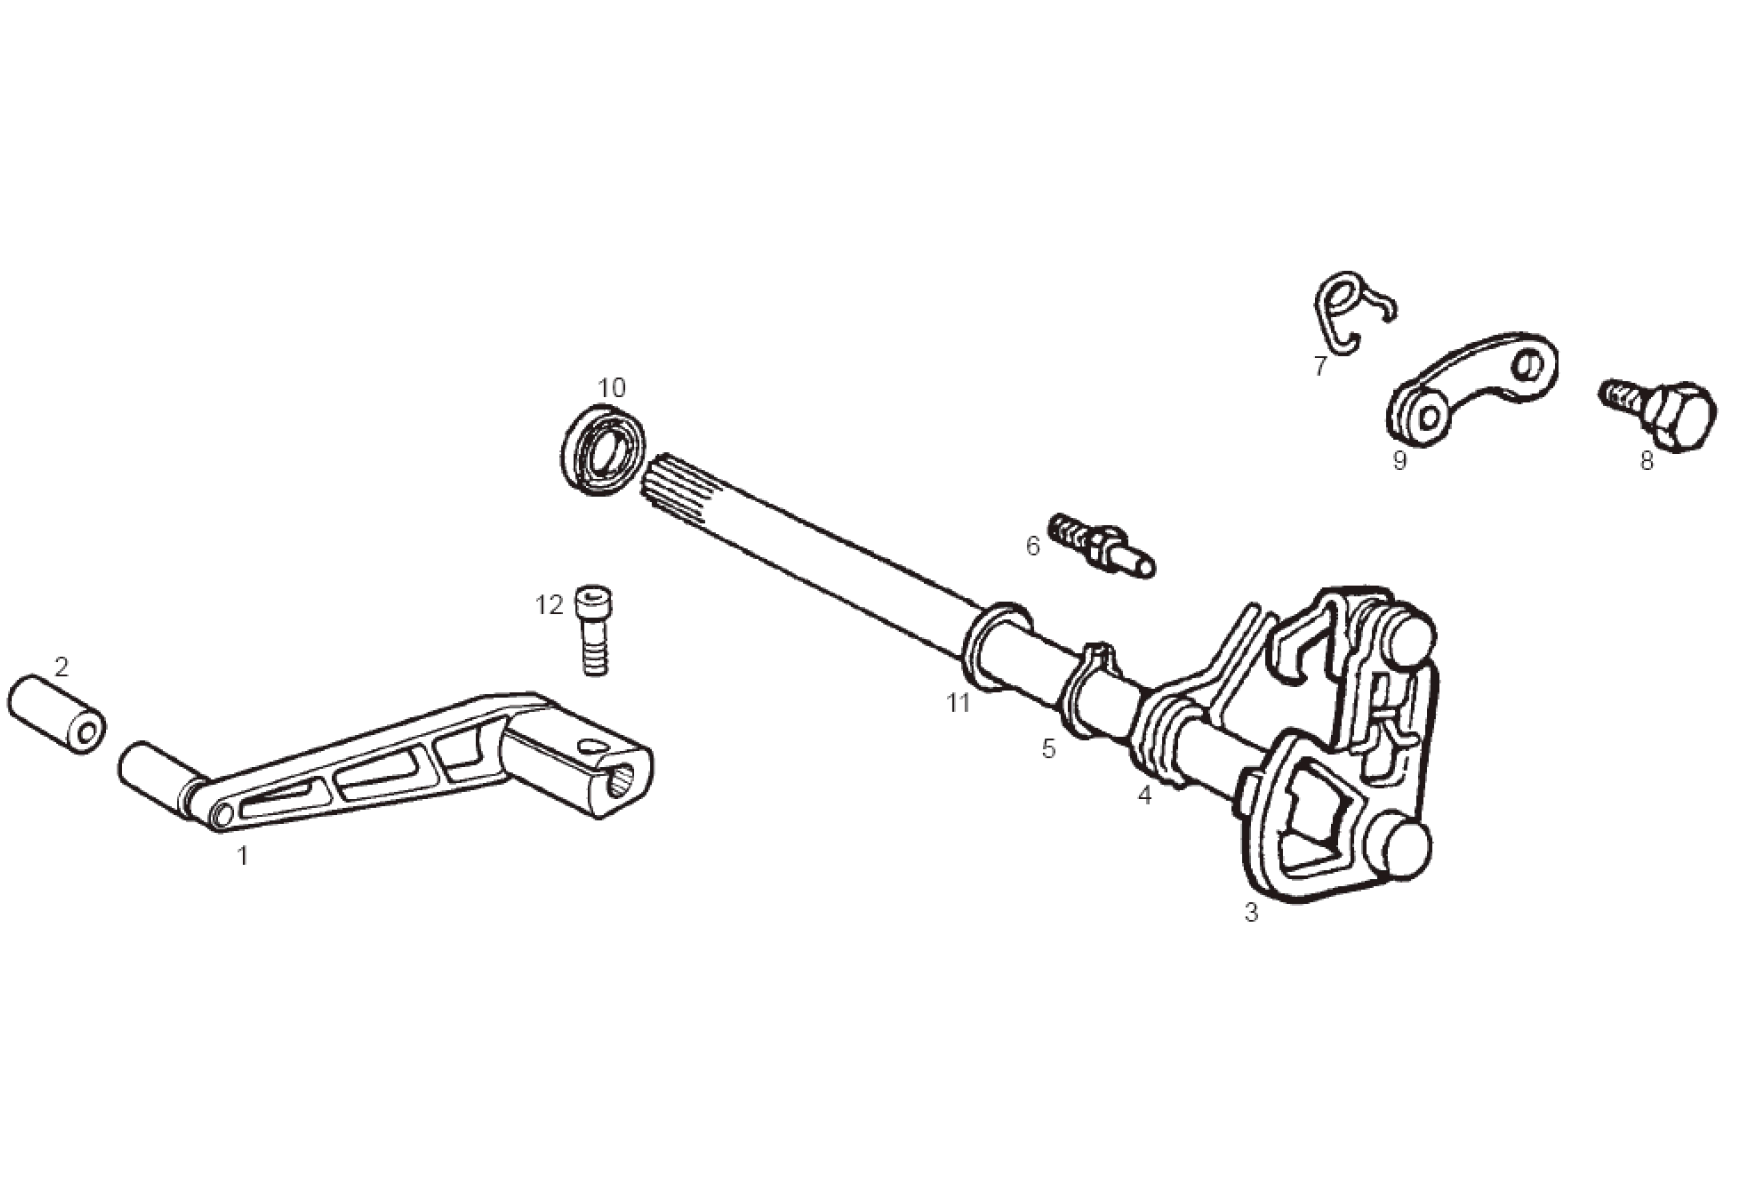 Exploded view Schakel handle